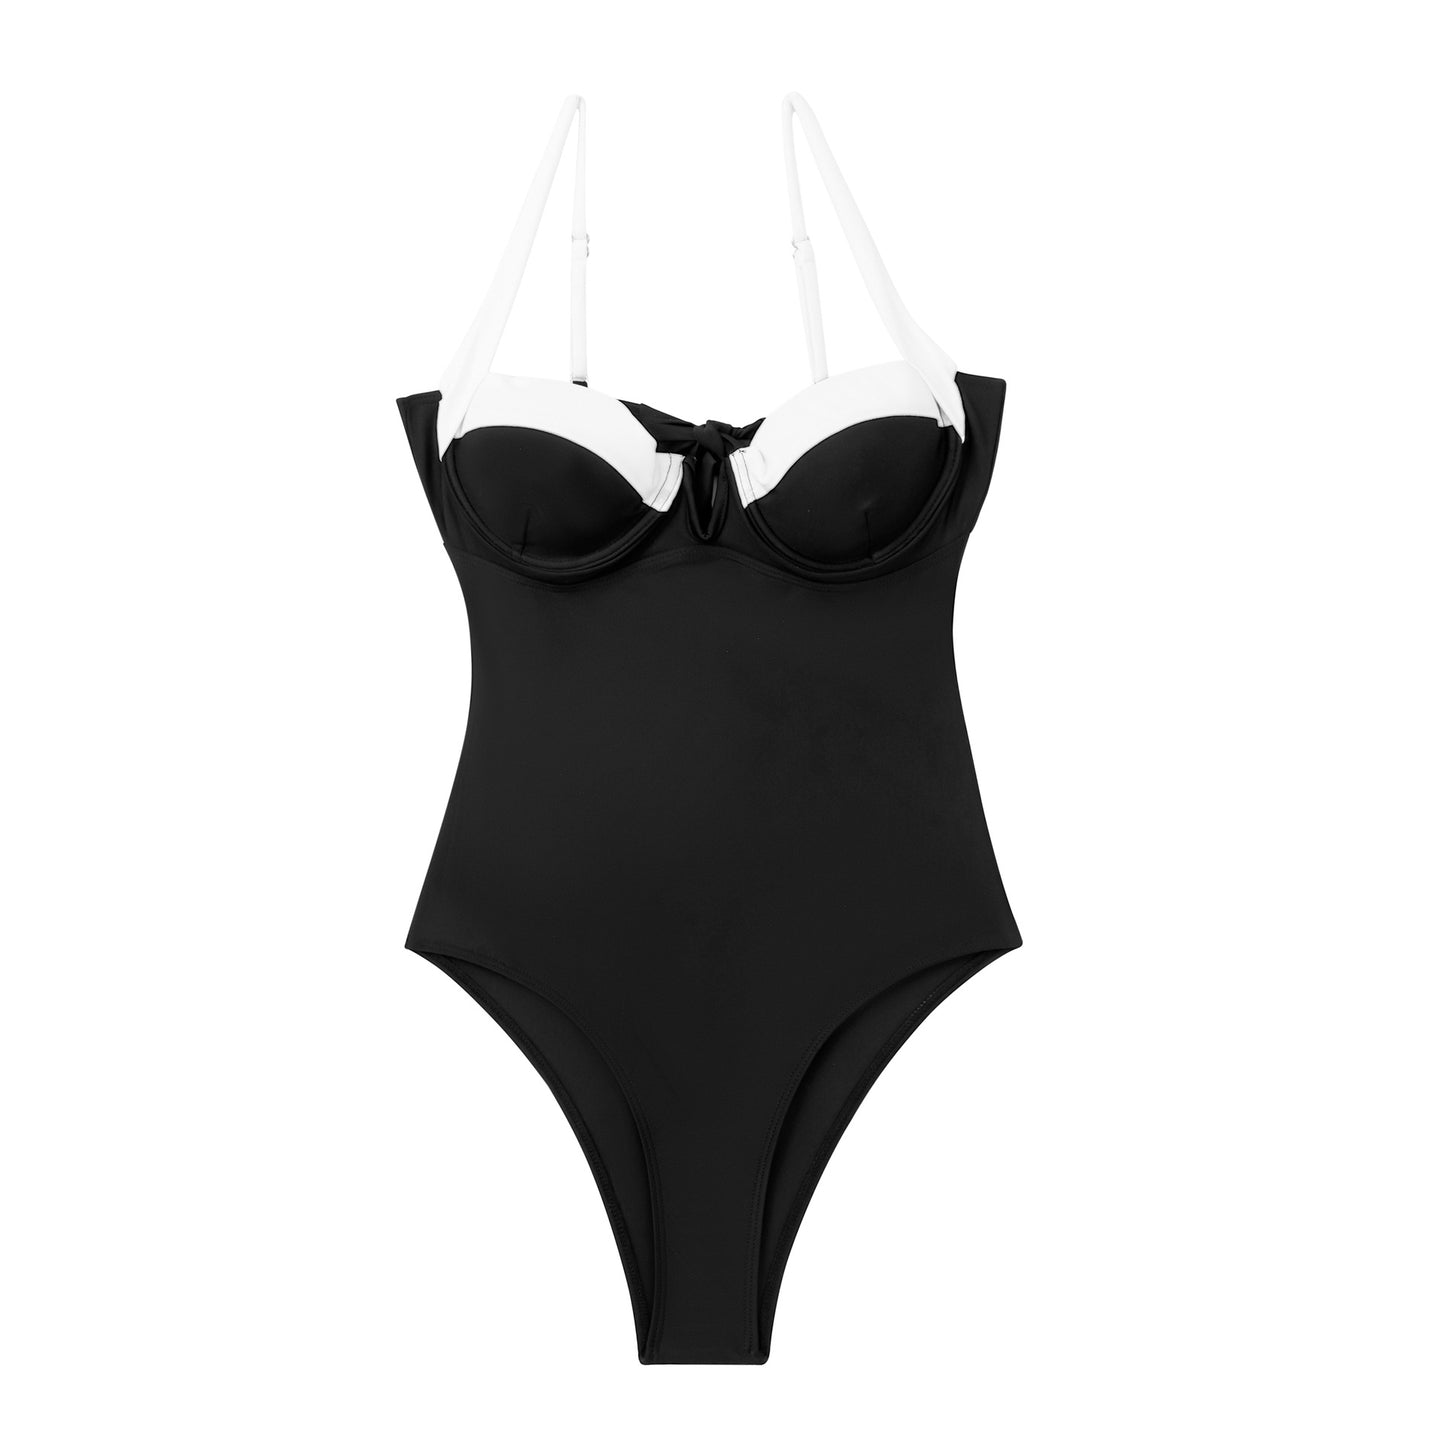 Capsule Wardrobe | Classic Black and White Contrast Conservative One Piece Swimsuit